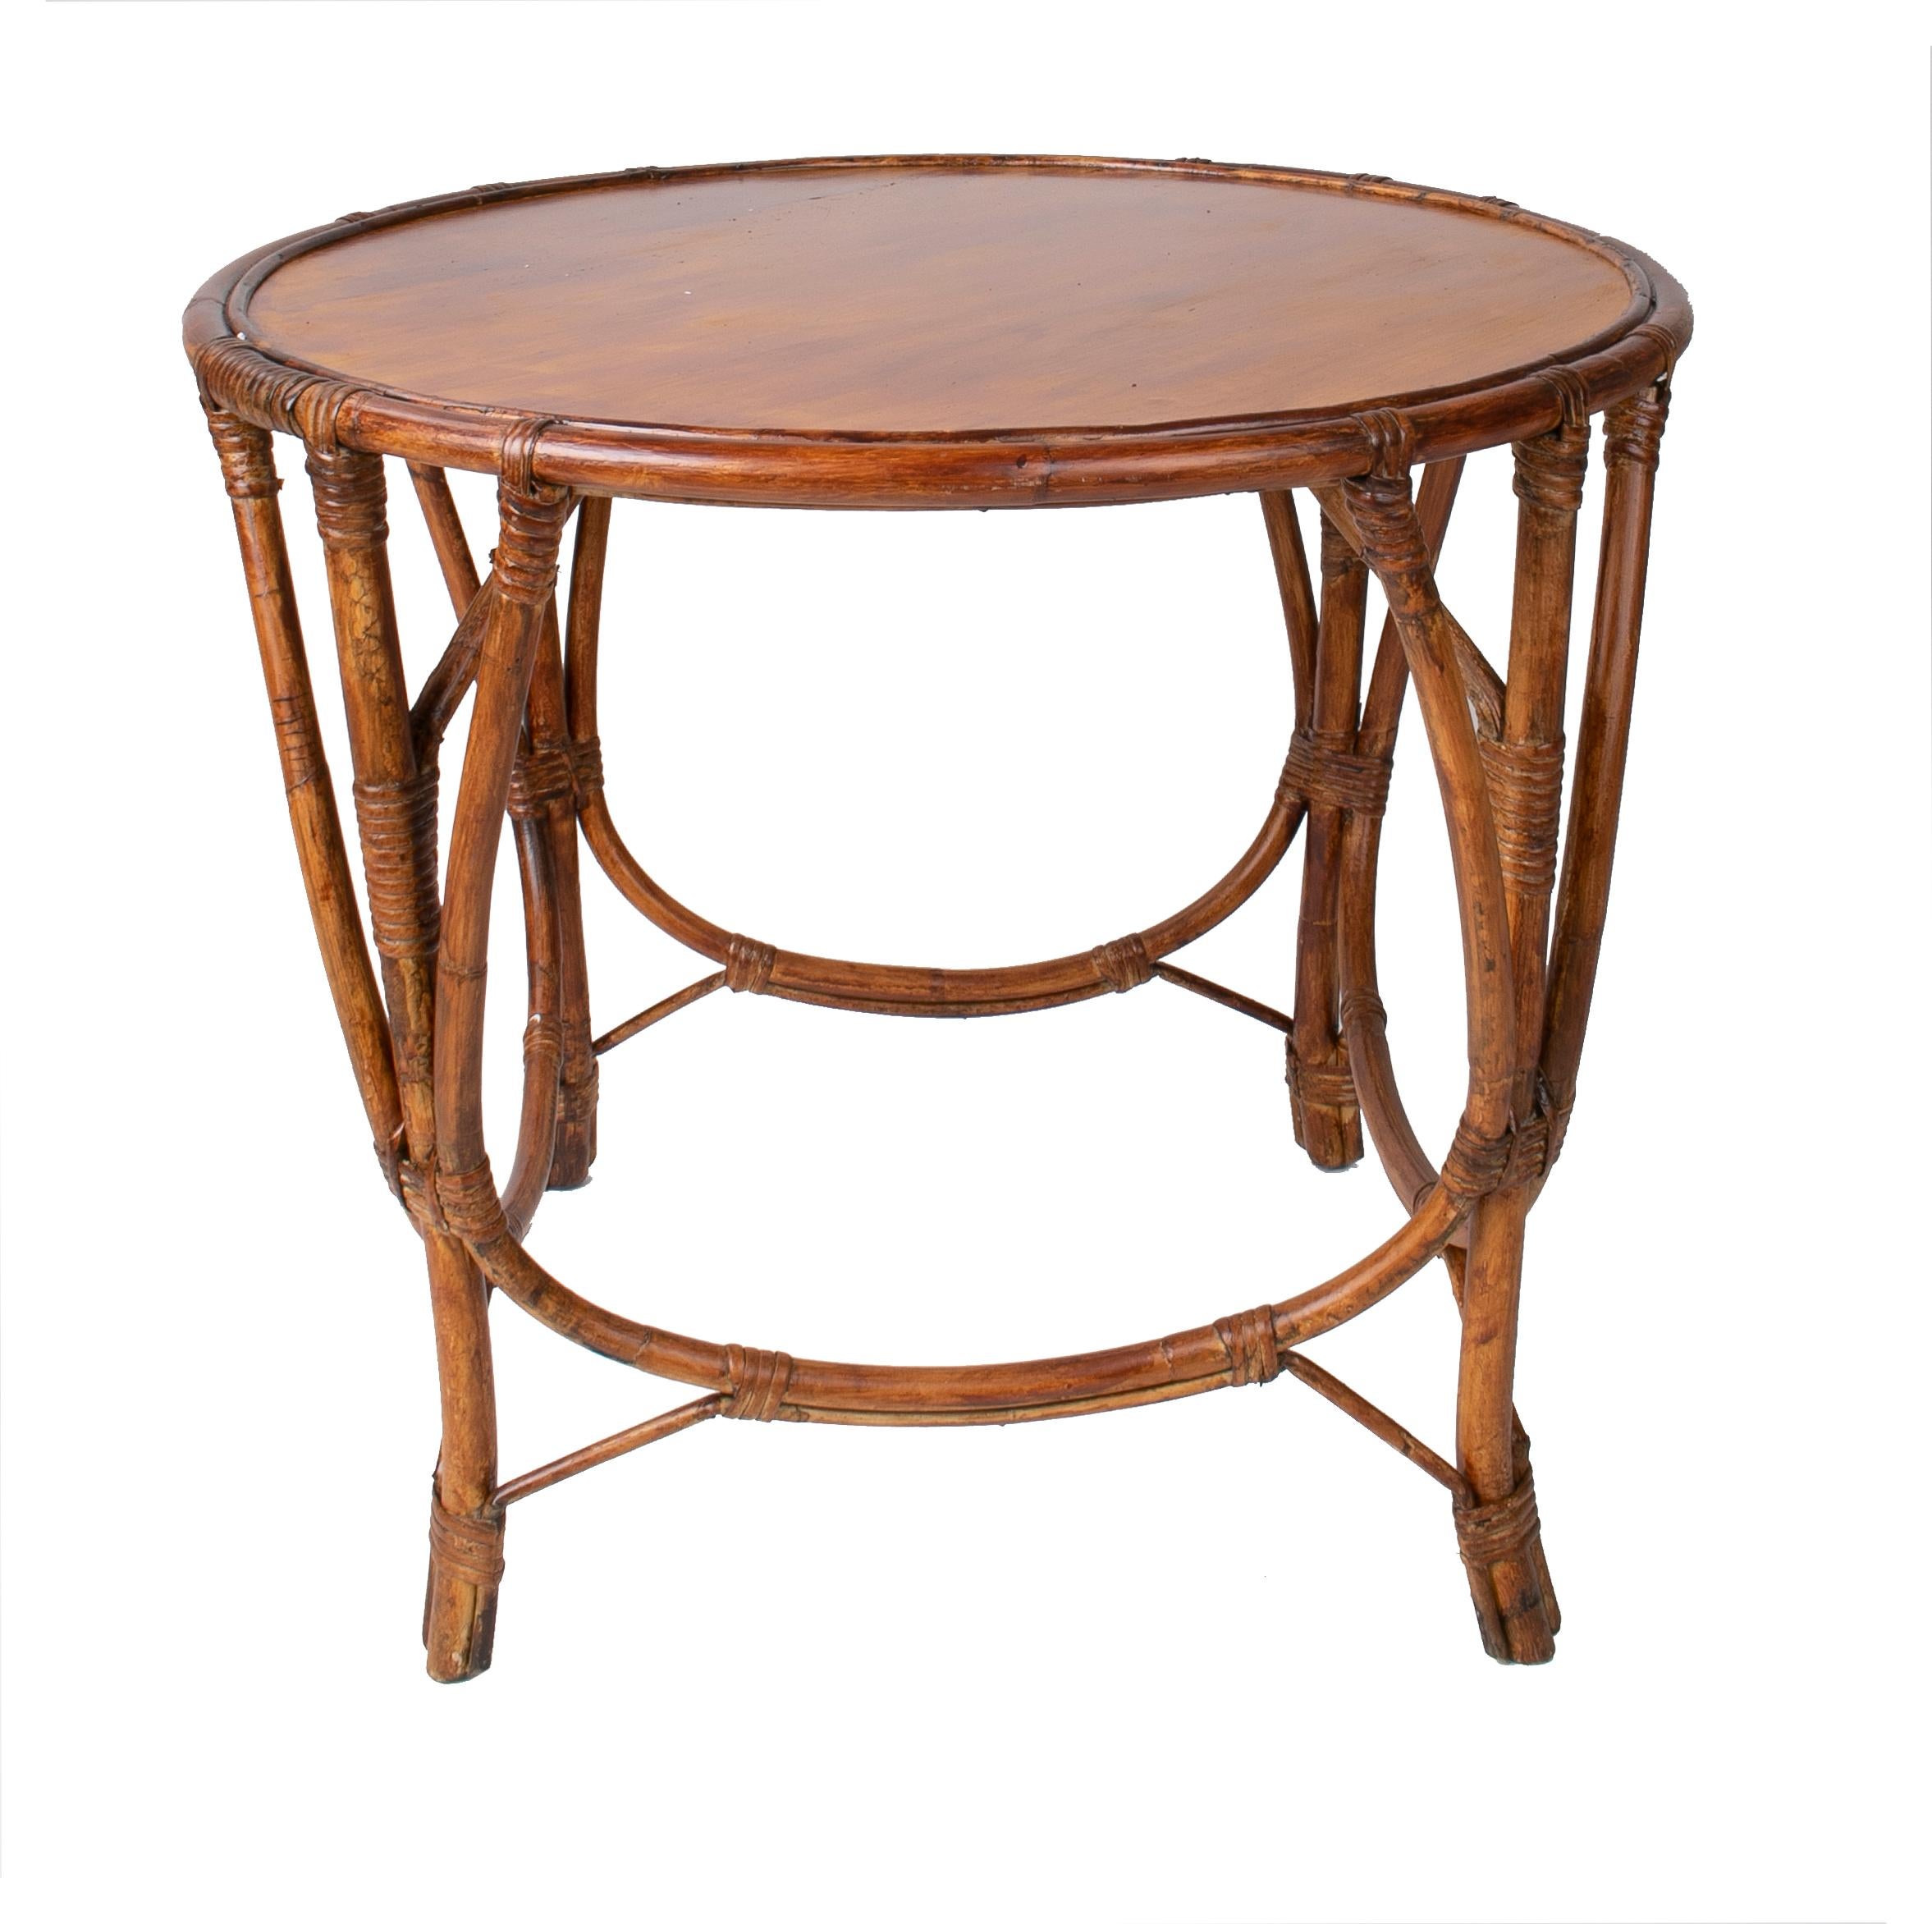 1970s Spanish bamboo round side table.